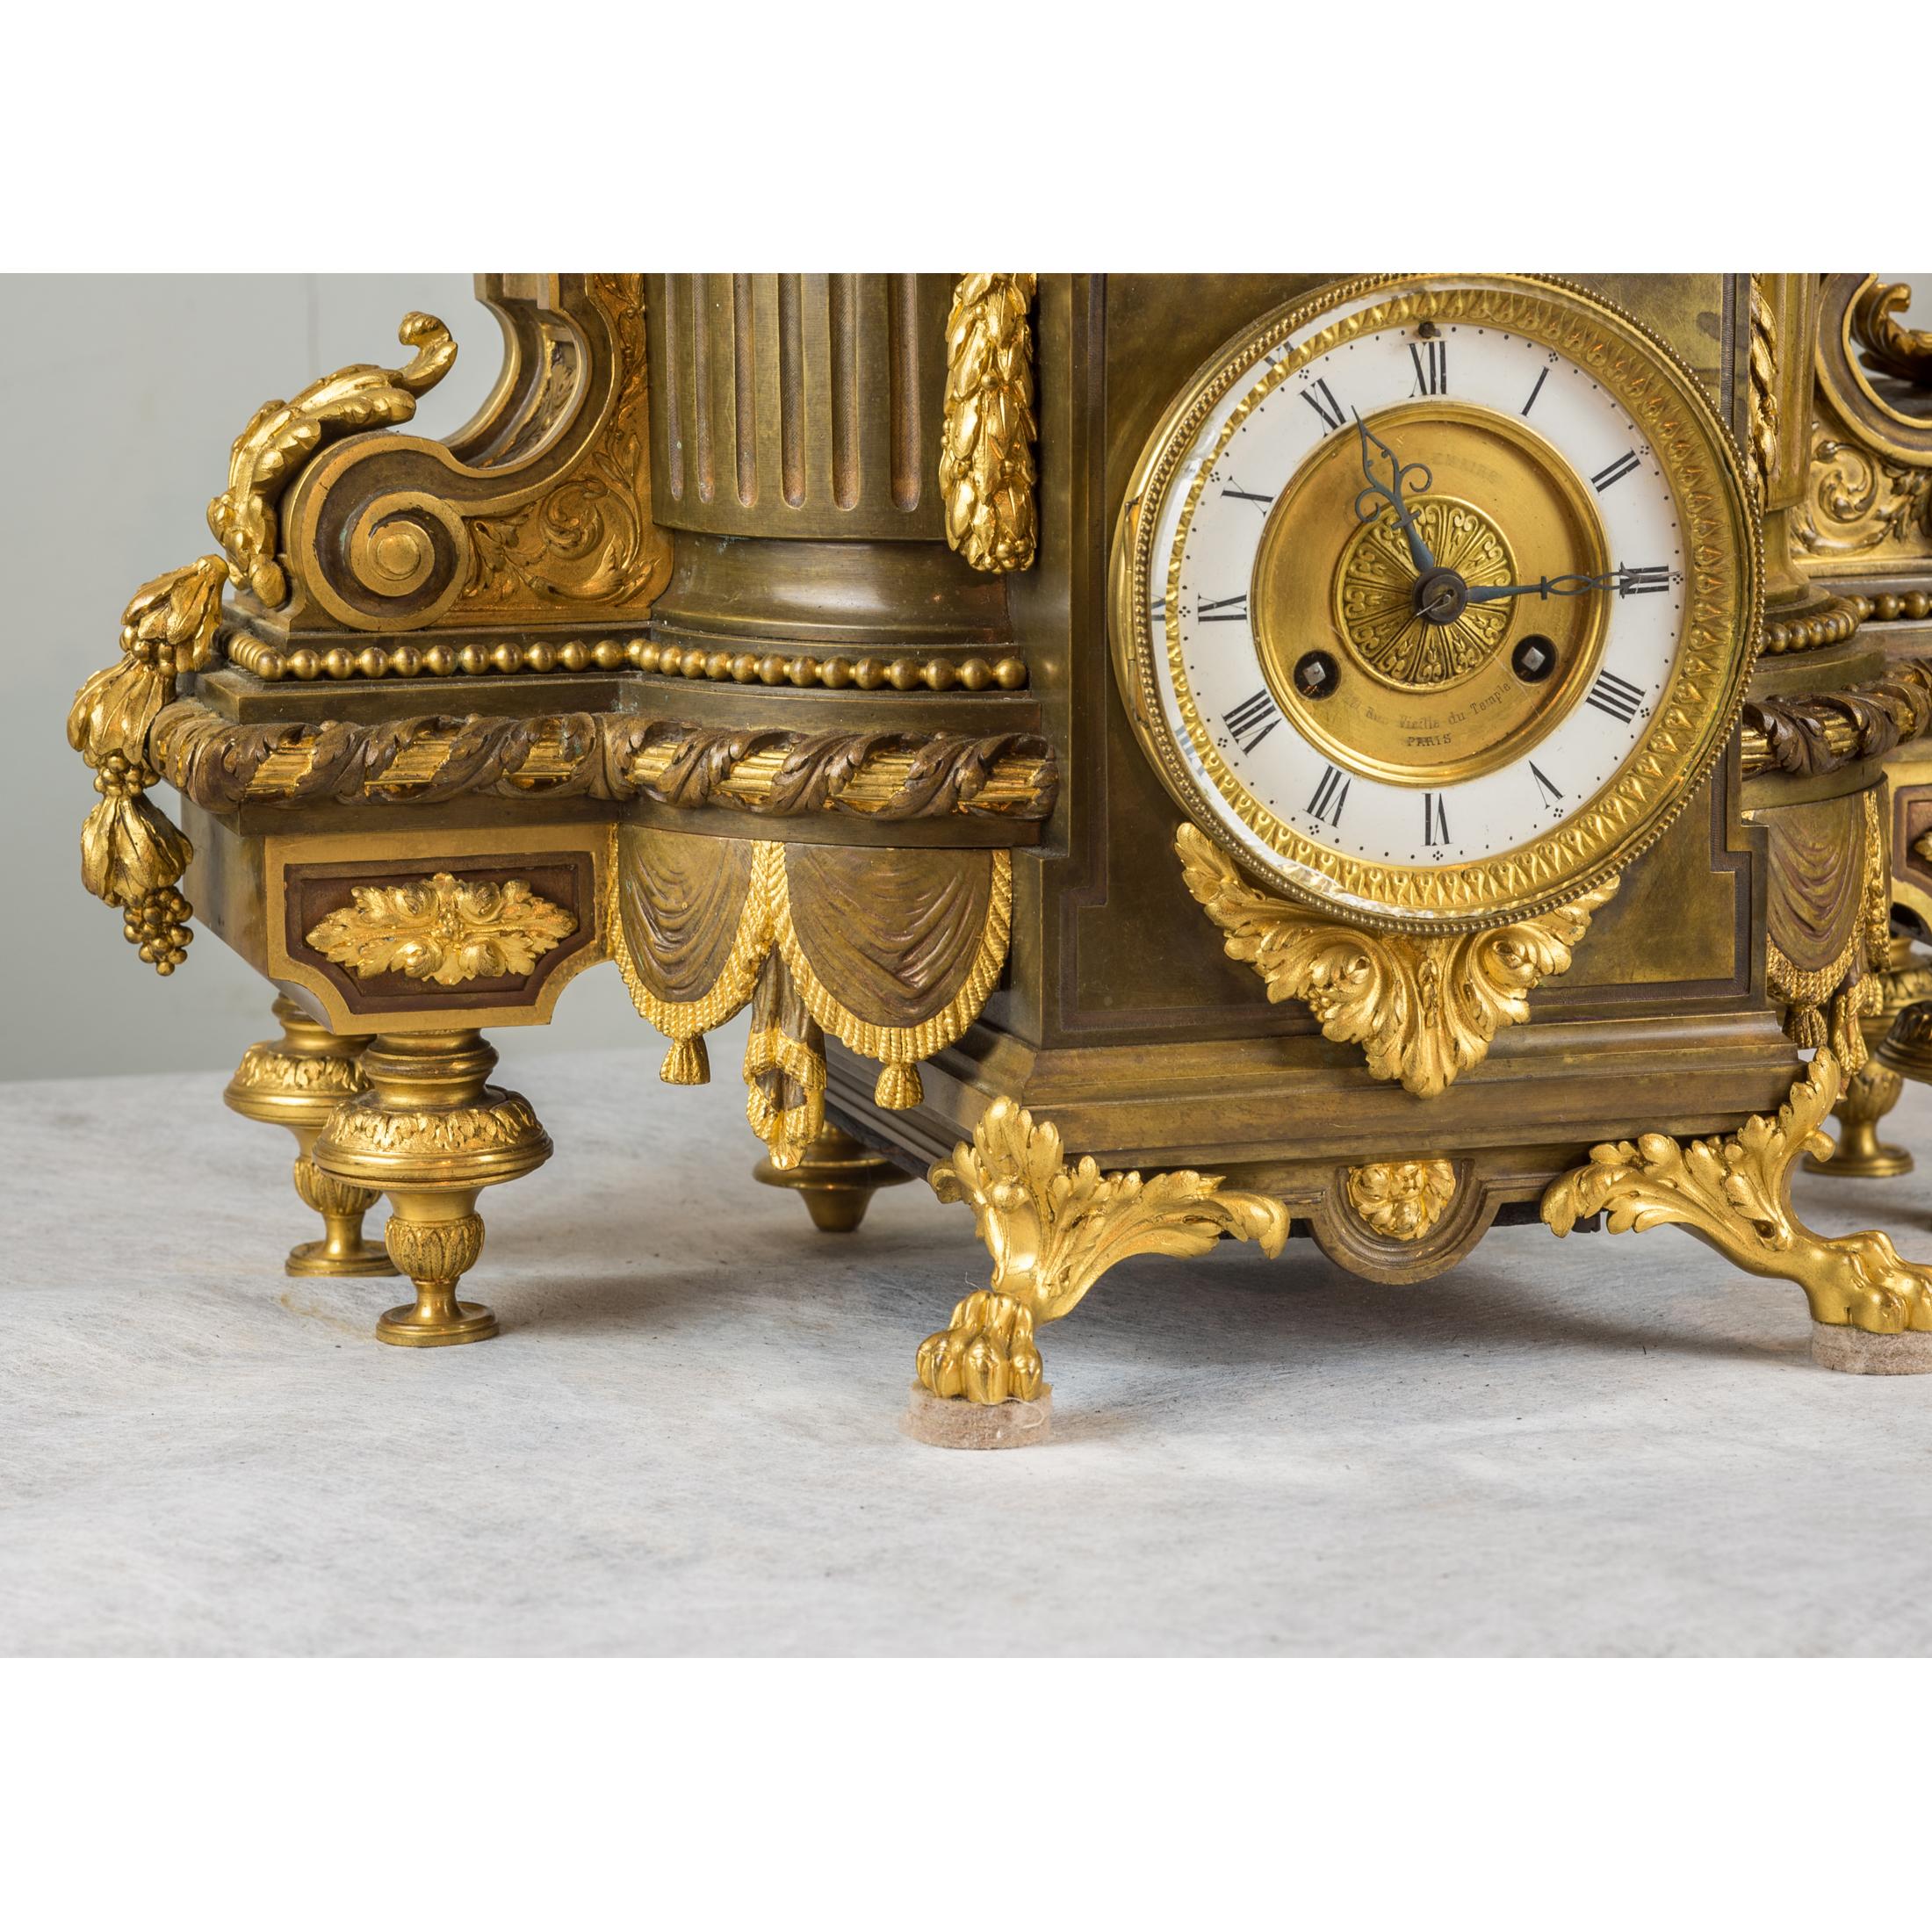 Carrier-Belleuse Napoleon III Gilt and Patinated Bronze Figural Mantel Clock  For Sale 4